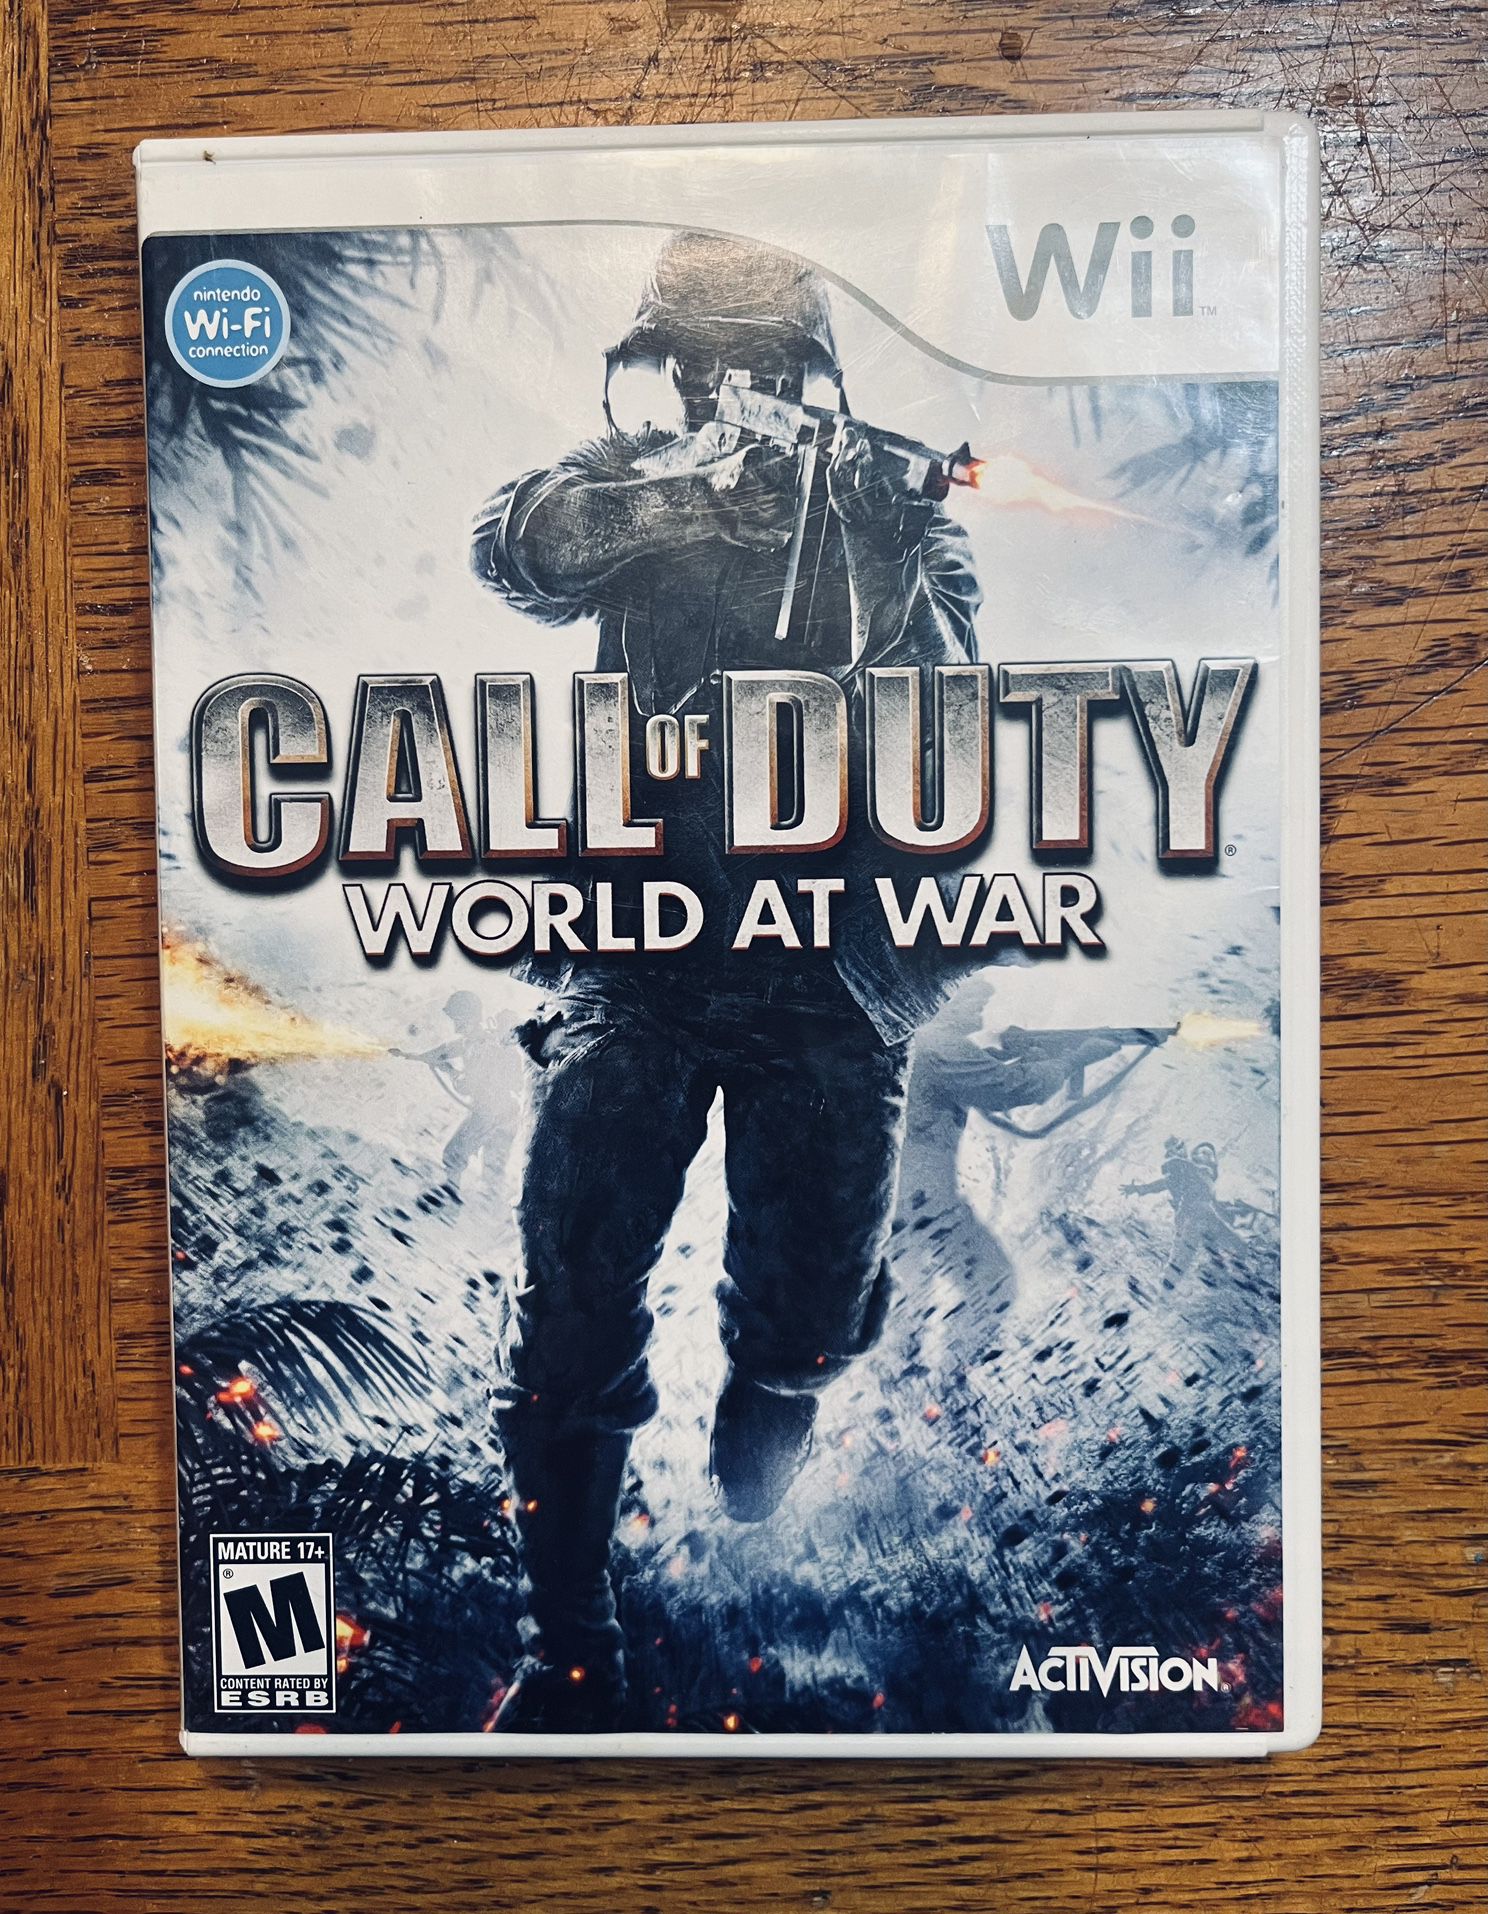 Call of Duty World at War for Nintendo Wii